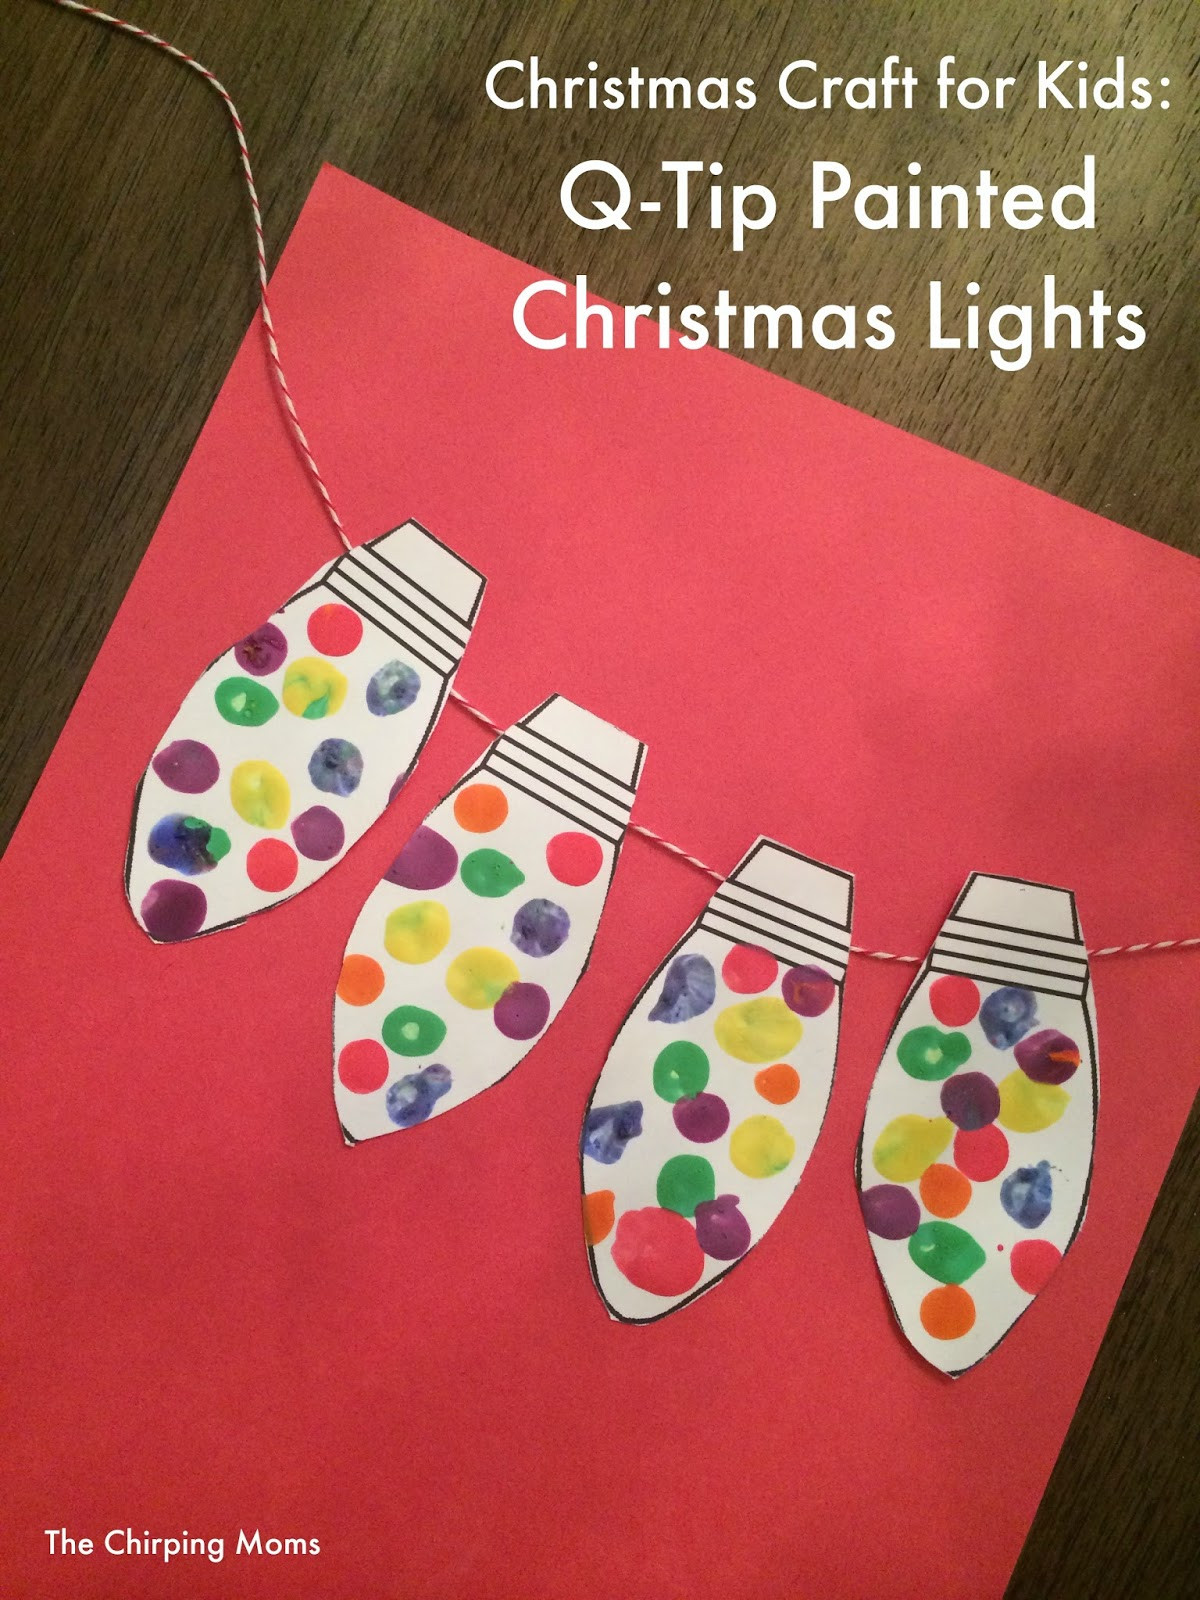 Pre School Christmas Craft Ideas
 12 Christmas Crafts for Kids to Make This Week The